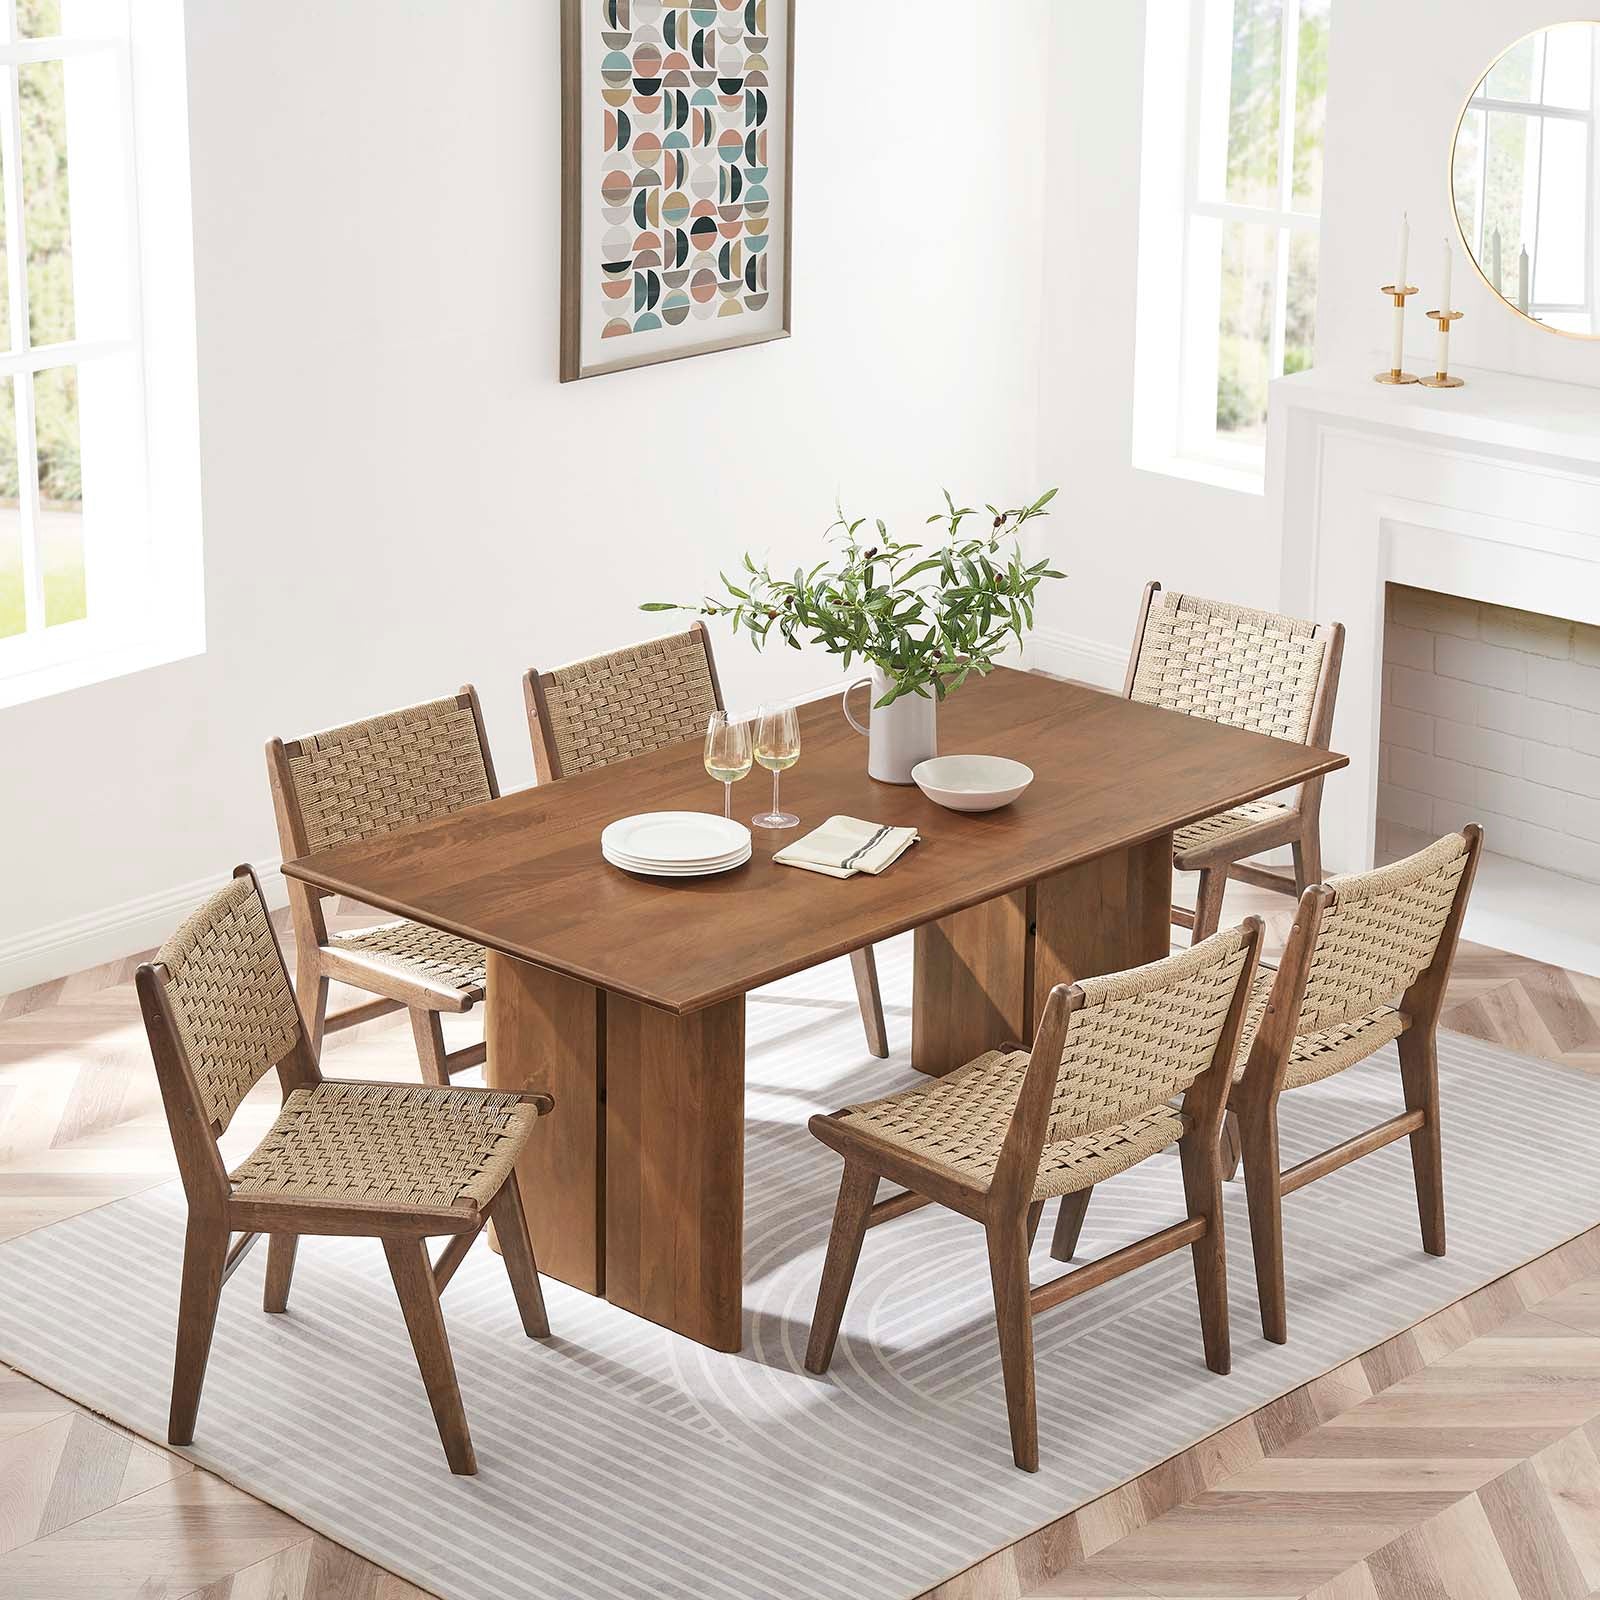 Amistad 72" Wood Dining Table - East Shore Modern Home Furnishings